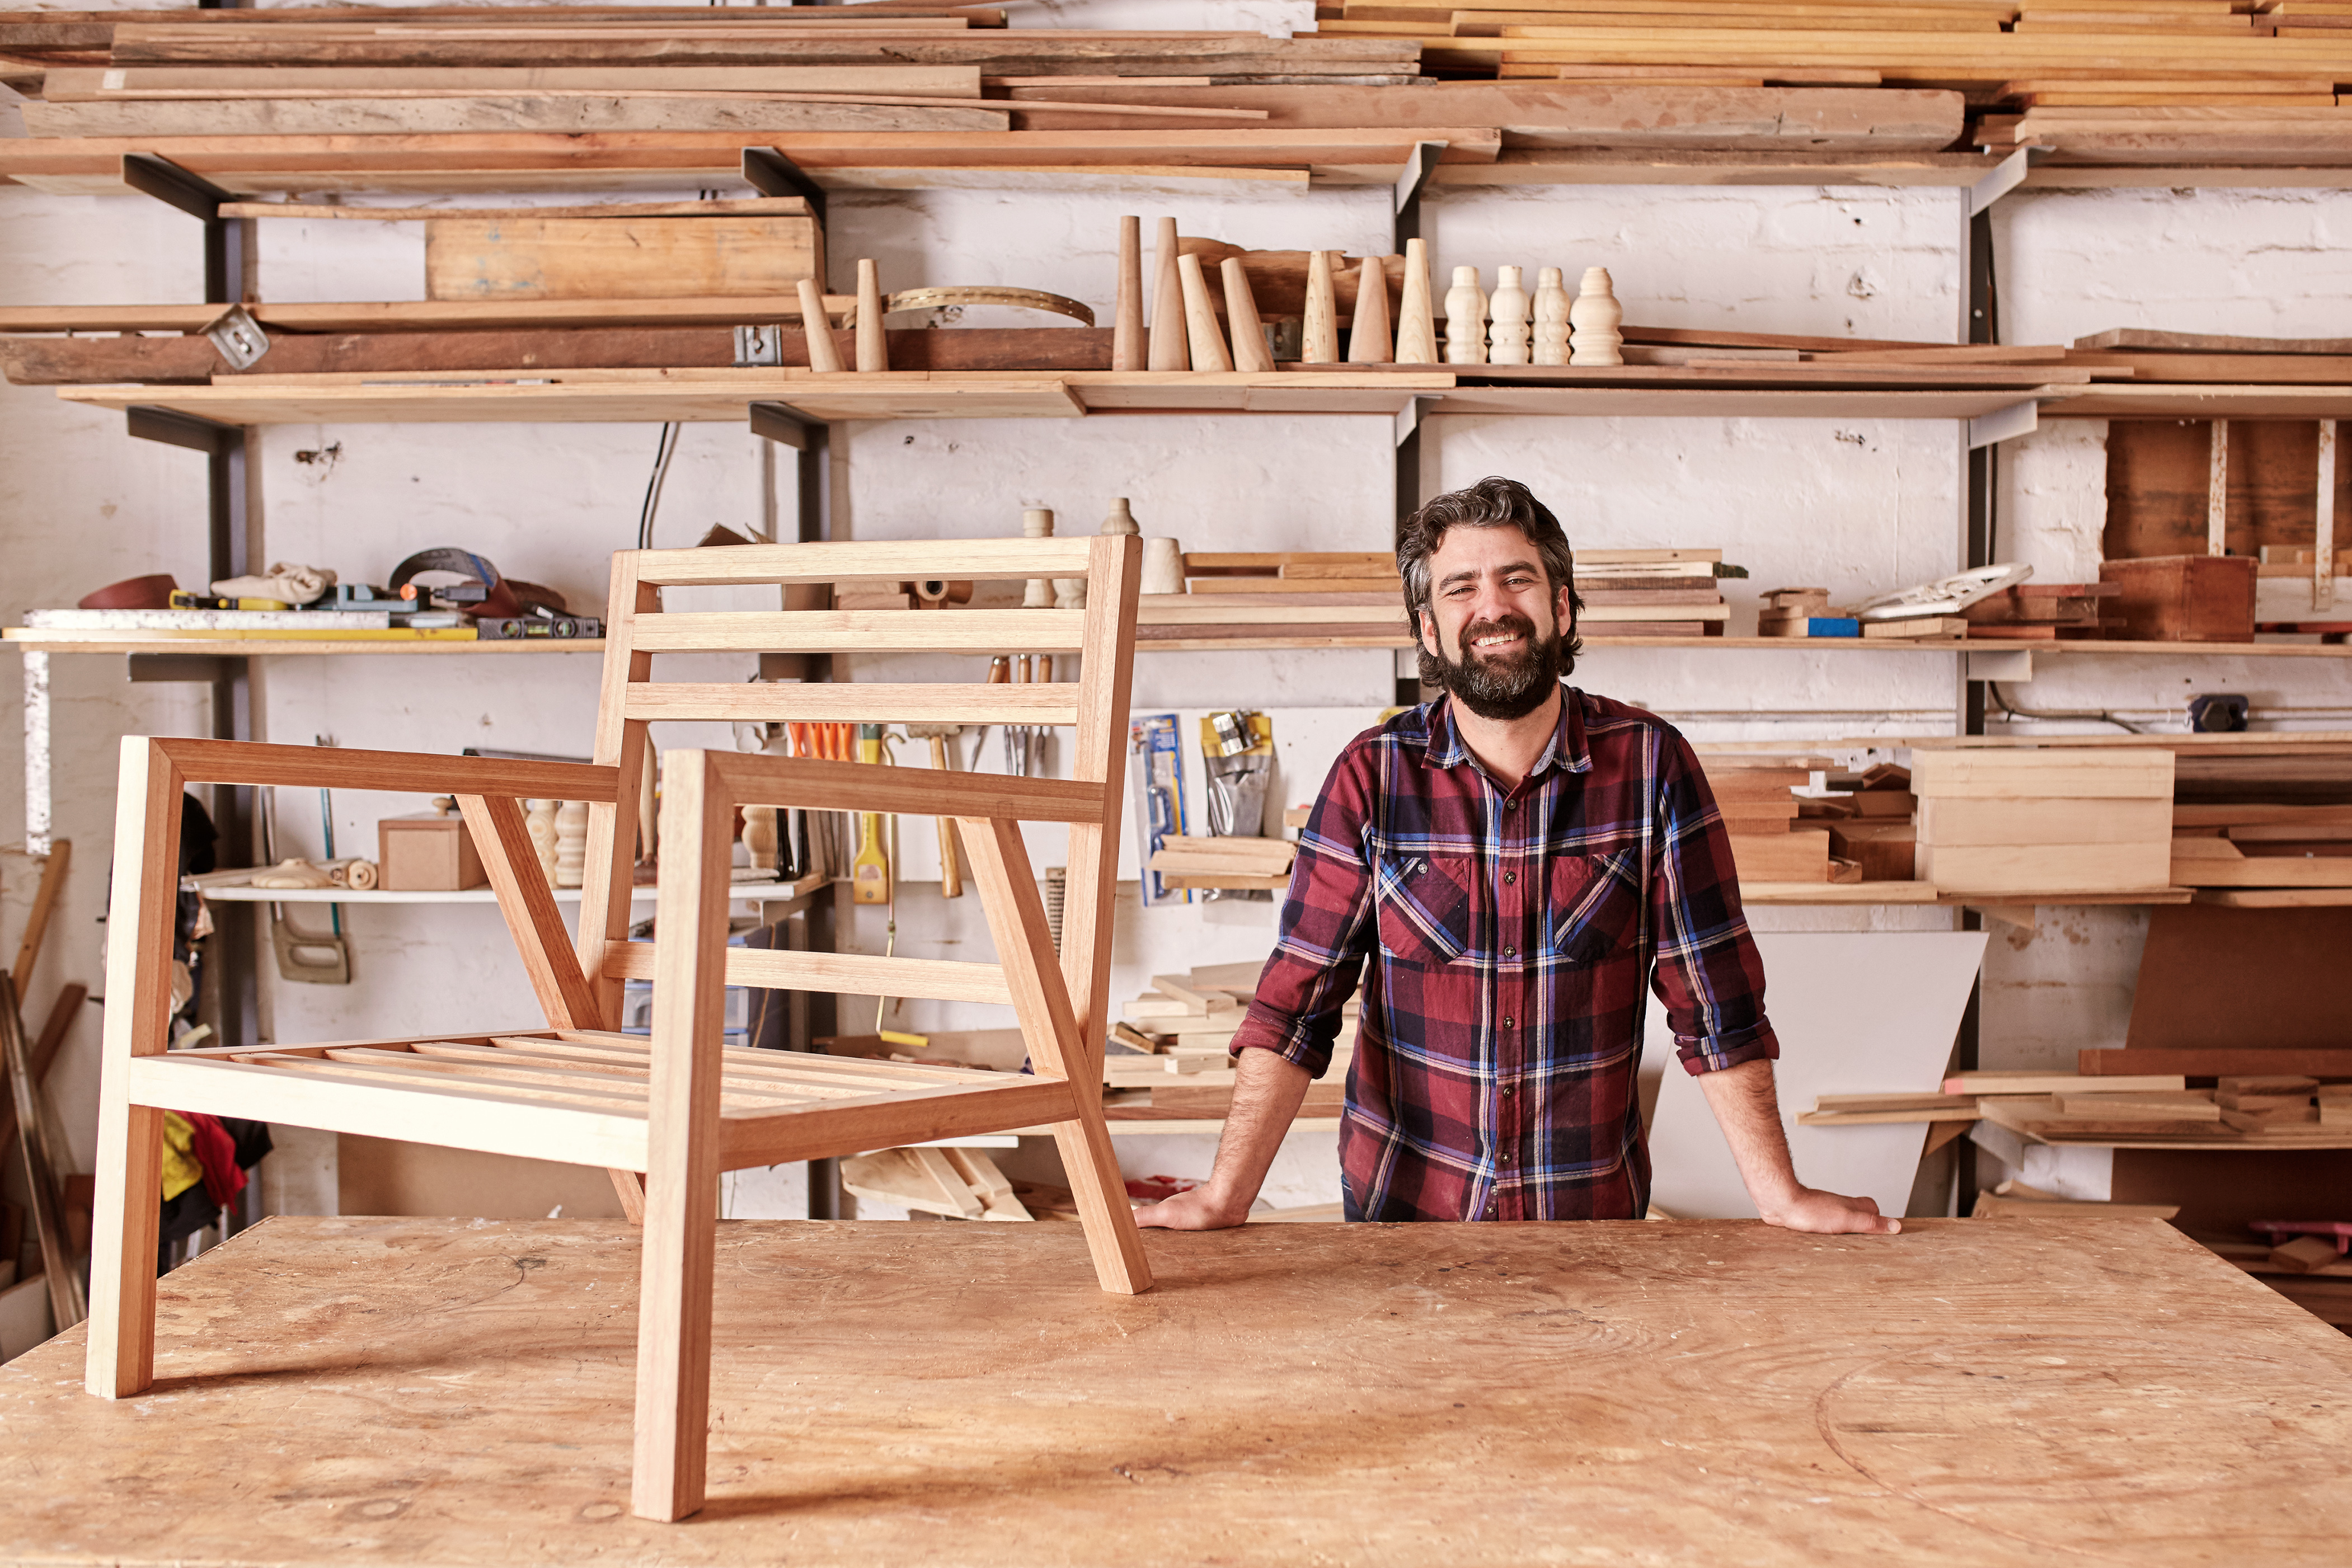 types of businesses - this furniture maker is a solopreneur but he can choose from several different business structures